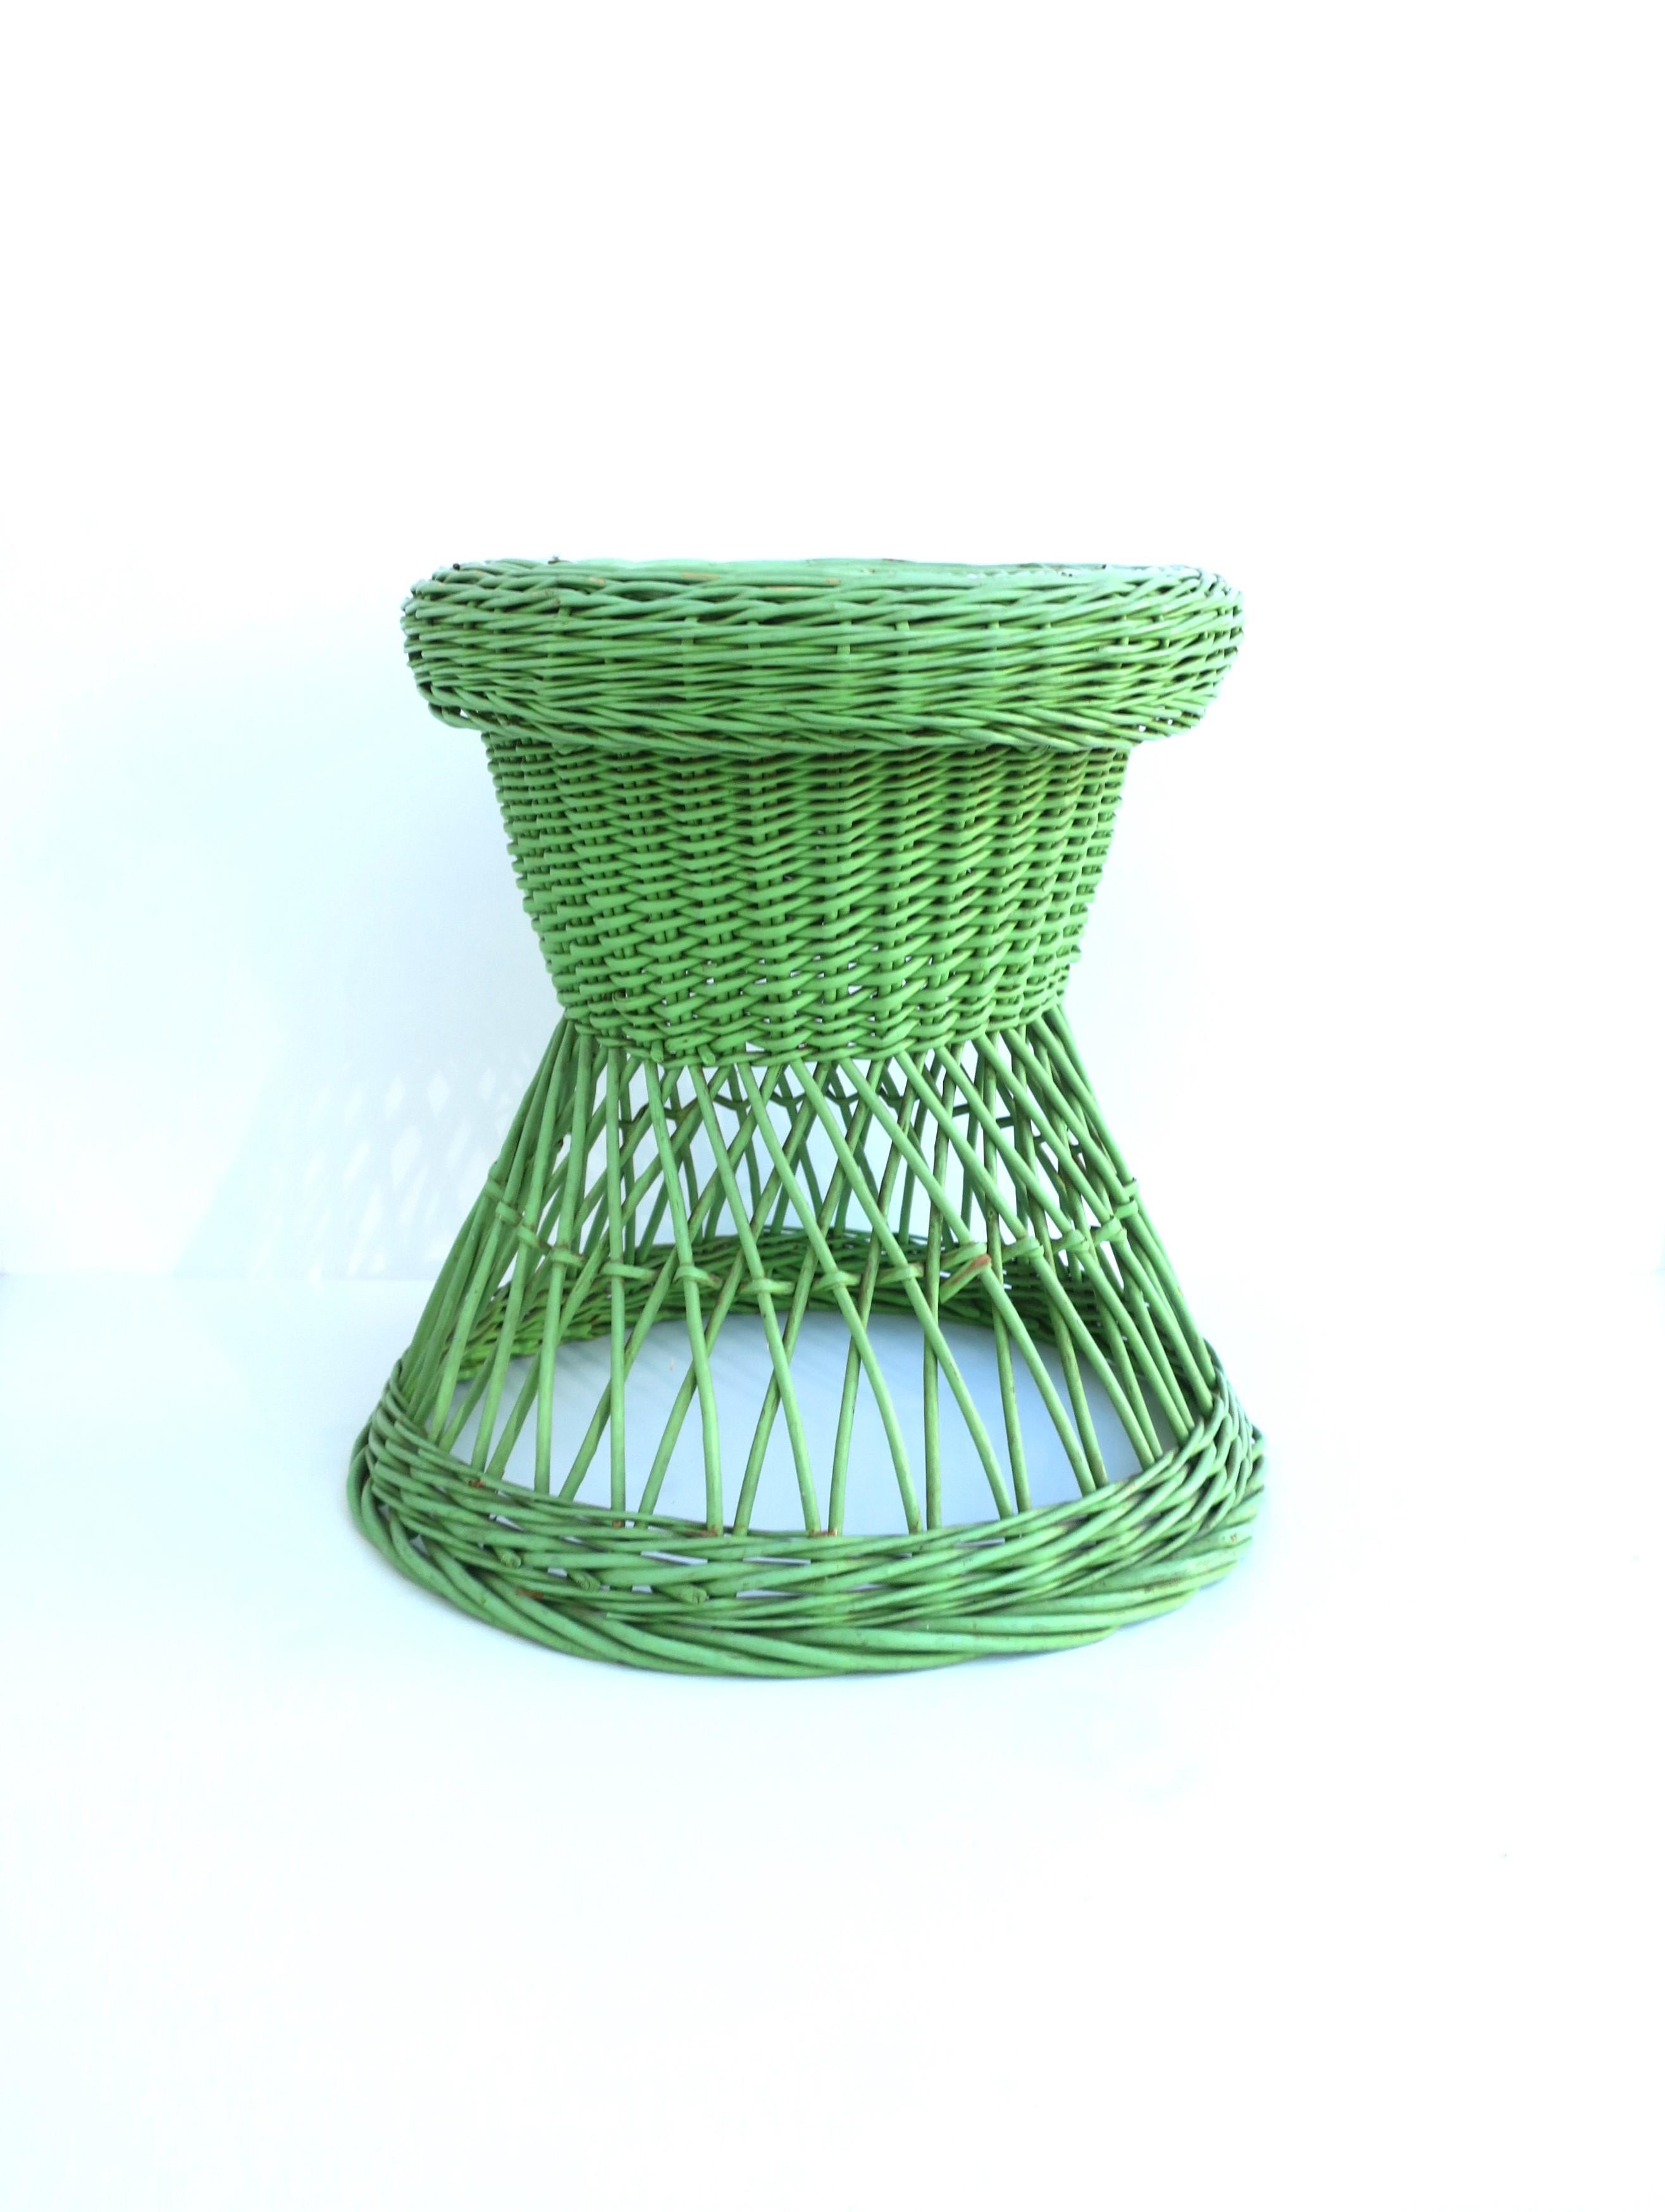 A pistachio green wicker stool with hourglass shape, circa early to mid-20th century. A pistachio green wicker stool or side/drinks table, plant stand, etc., many uses. It appears that color/paint was professionally applied. Piece is a convenient